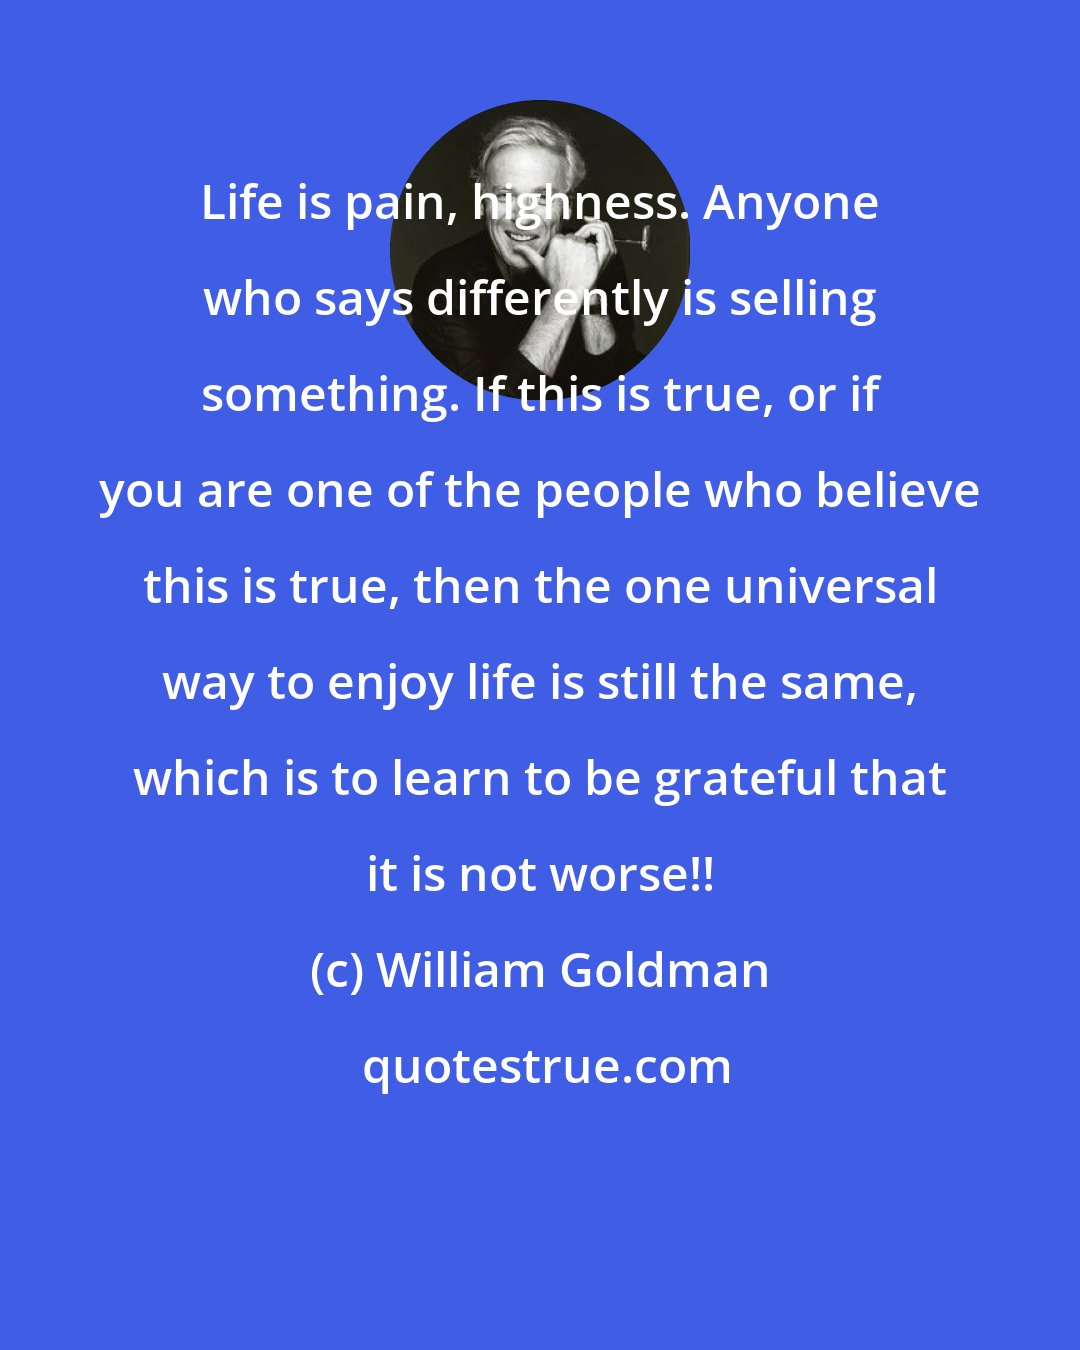 William Goldman: Life is pain, highness. Anyone who says differently is selling something. If this is true, or if you are one of the people who believe this is true, then the one universal way to enjoy life is still the same, which is to learn to be grateful that it is not worse!!